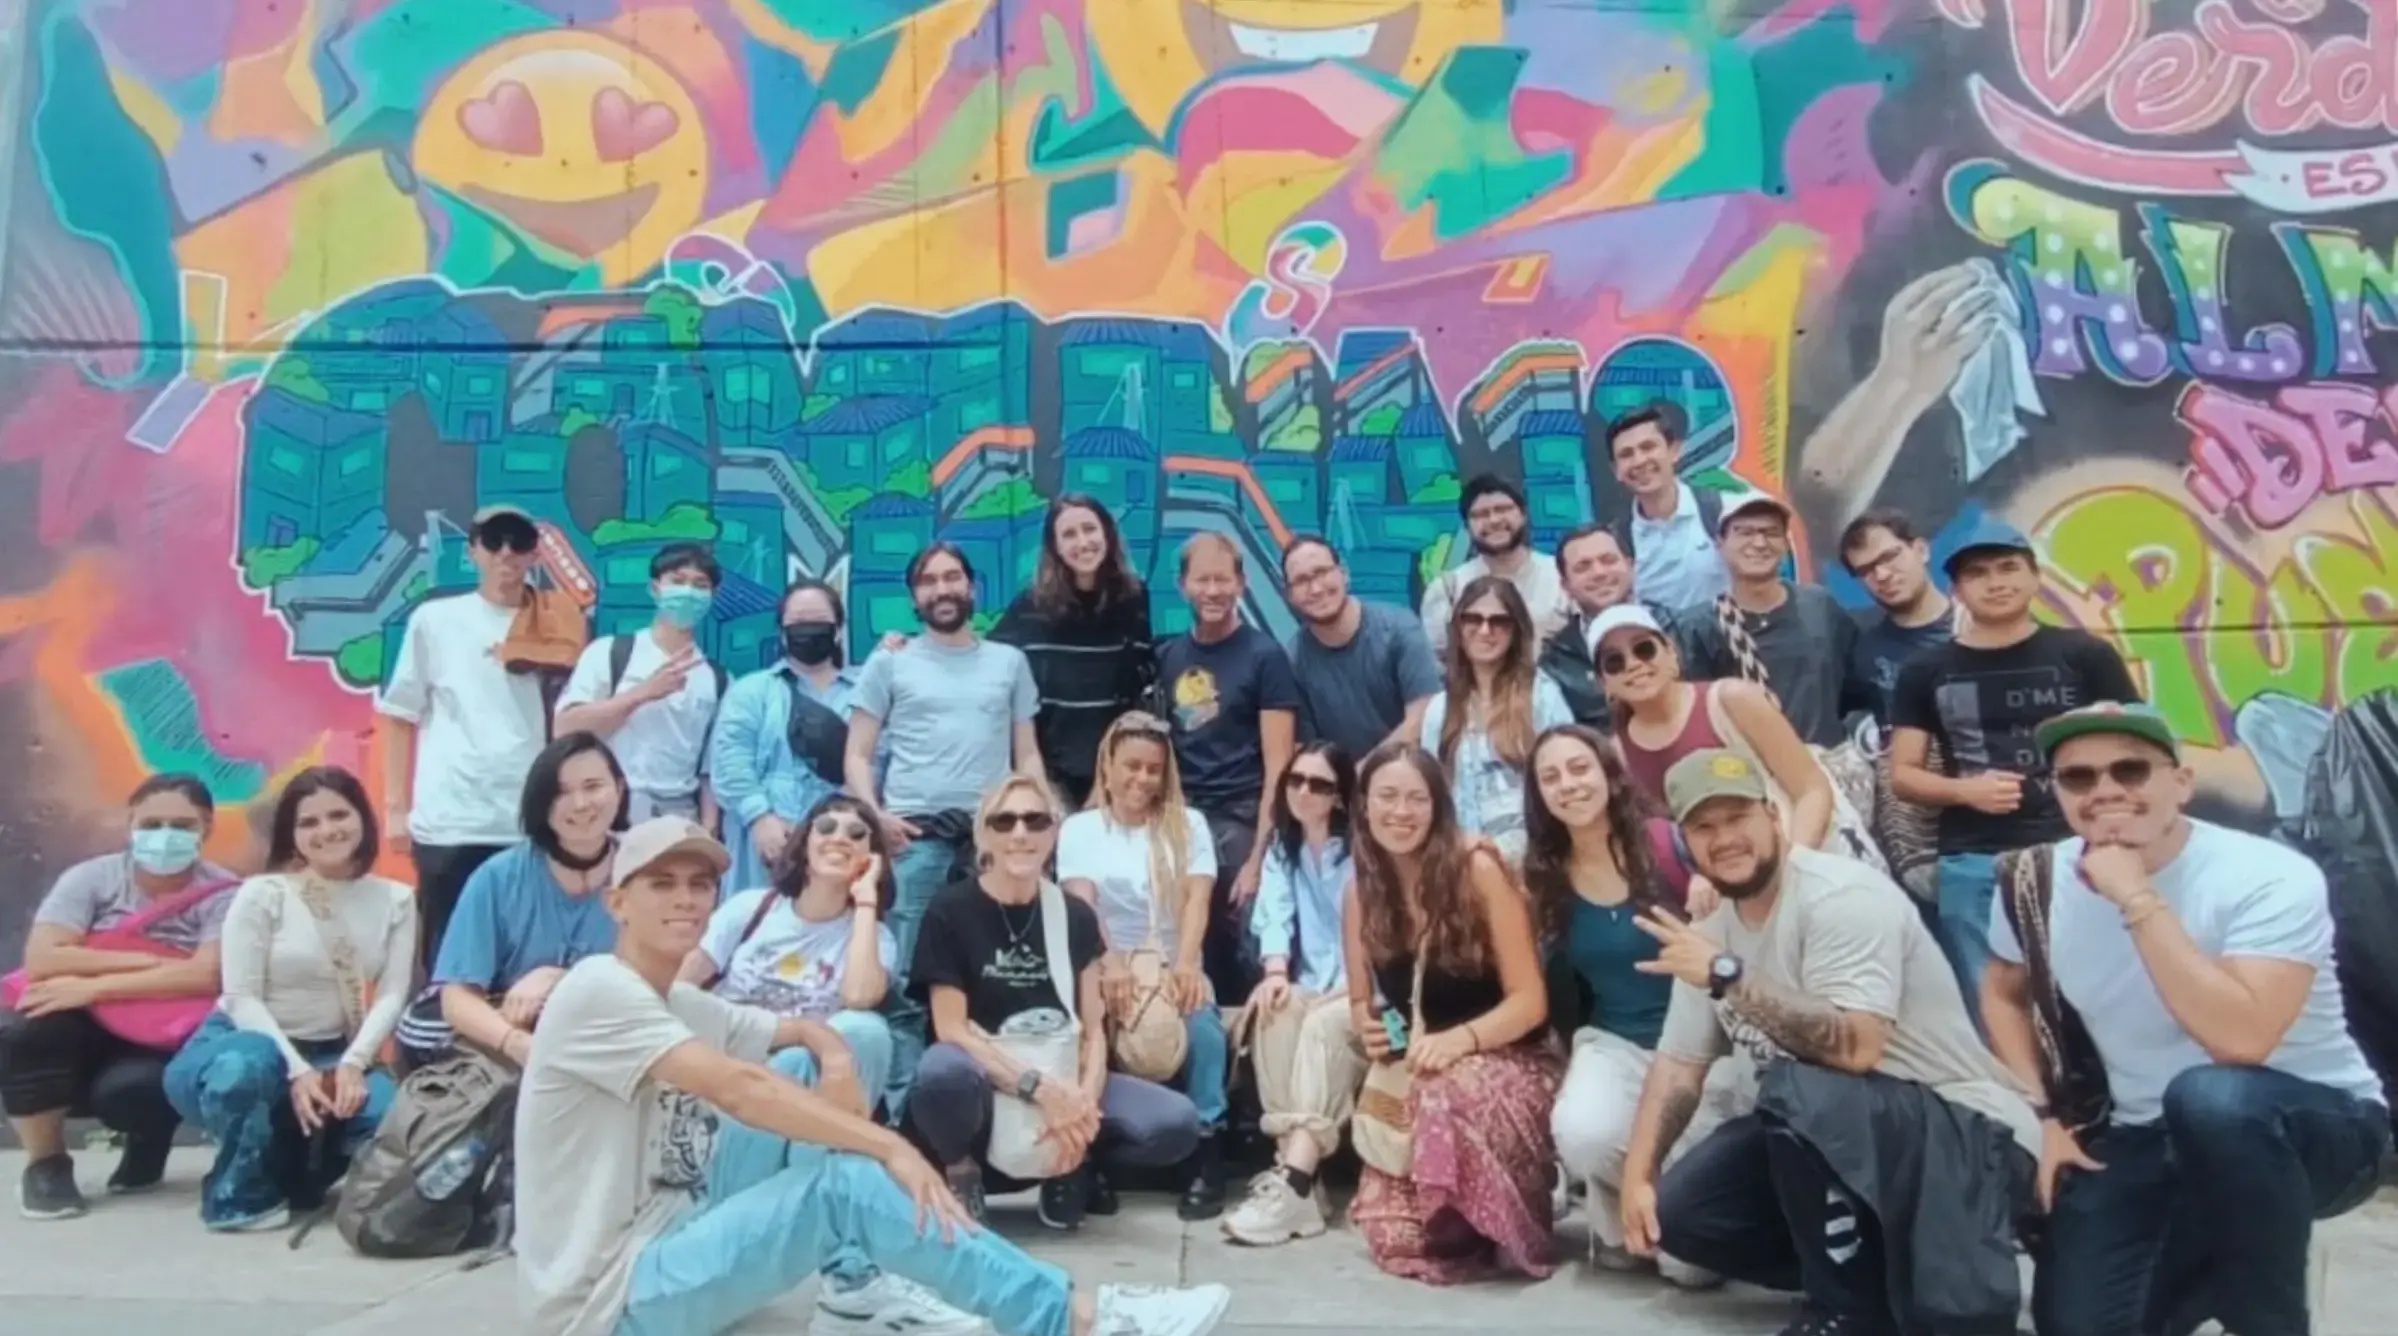 Group photo in front of graffiti mural